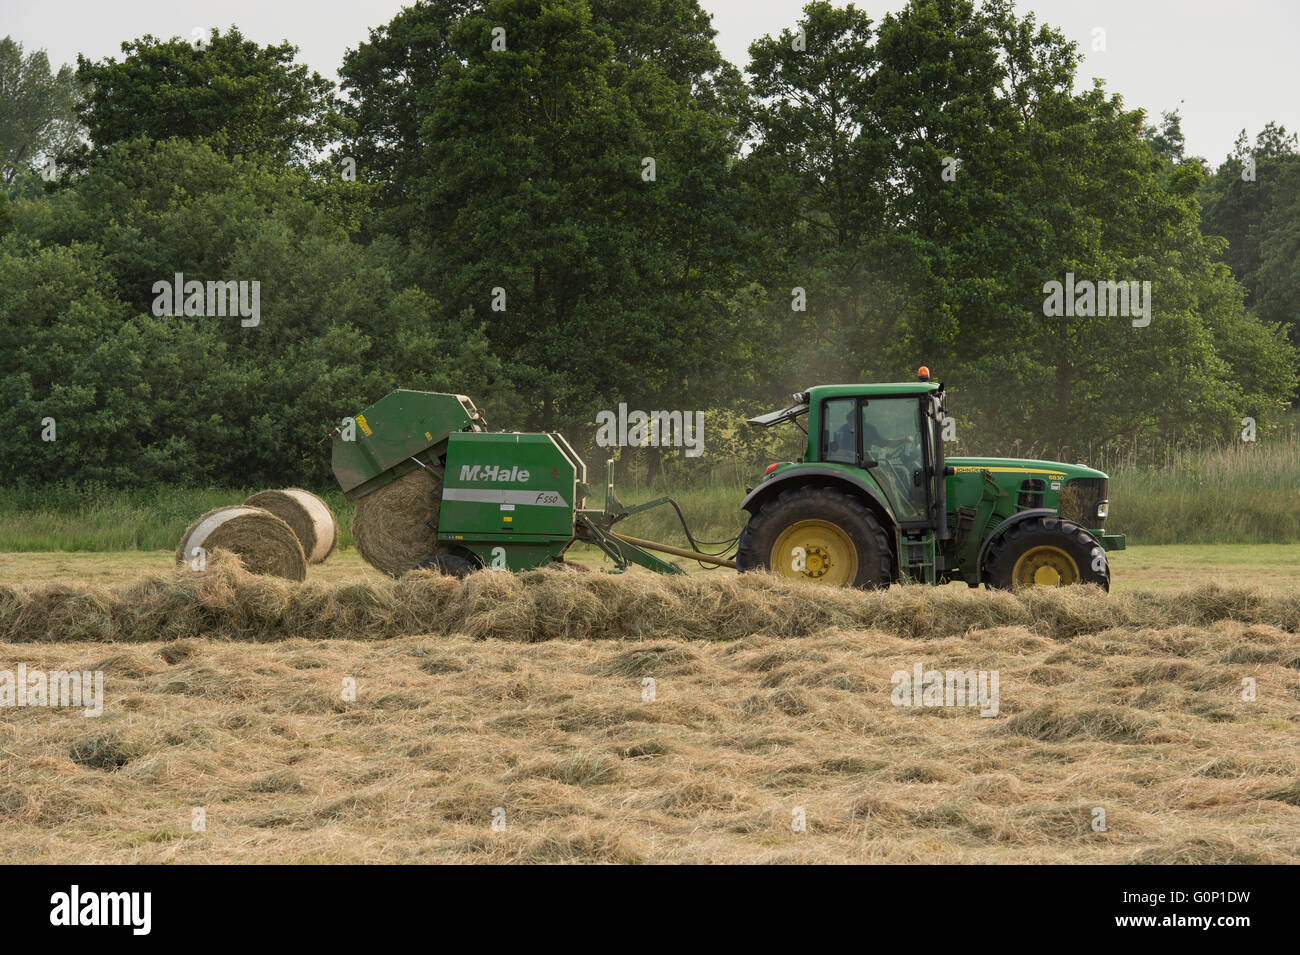 Great Ouseburn, North Yorkshire, GB - cylindrical bale is falling from round baler pulled by farm tractor driving & working in a field, making silage. Stock Photo